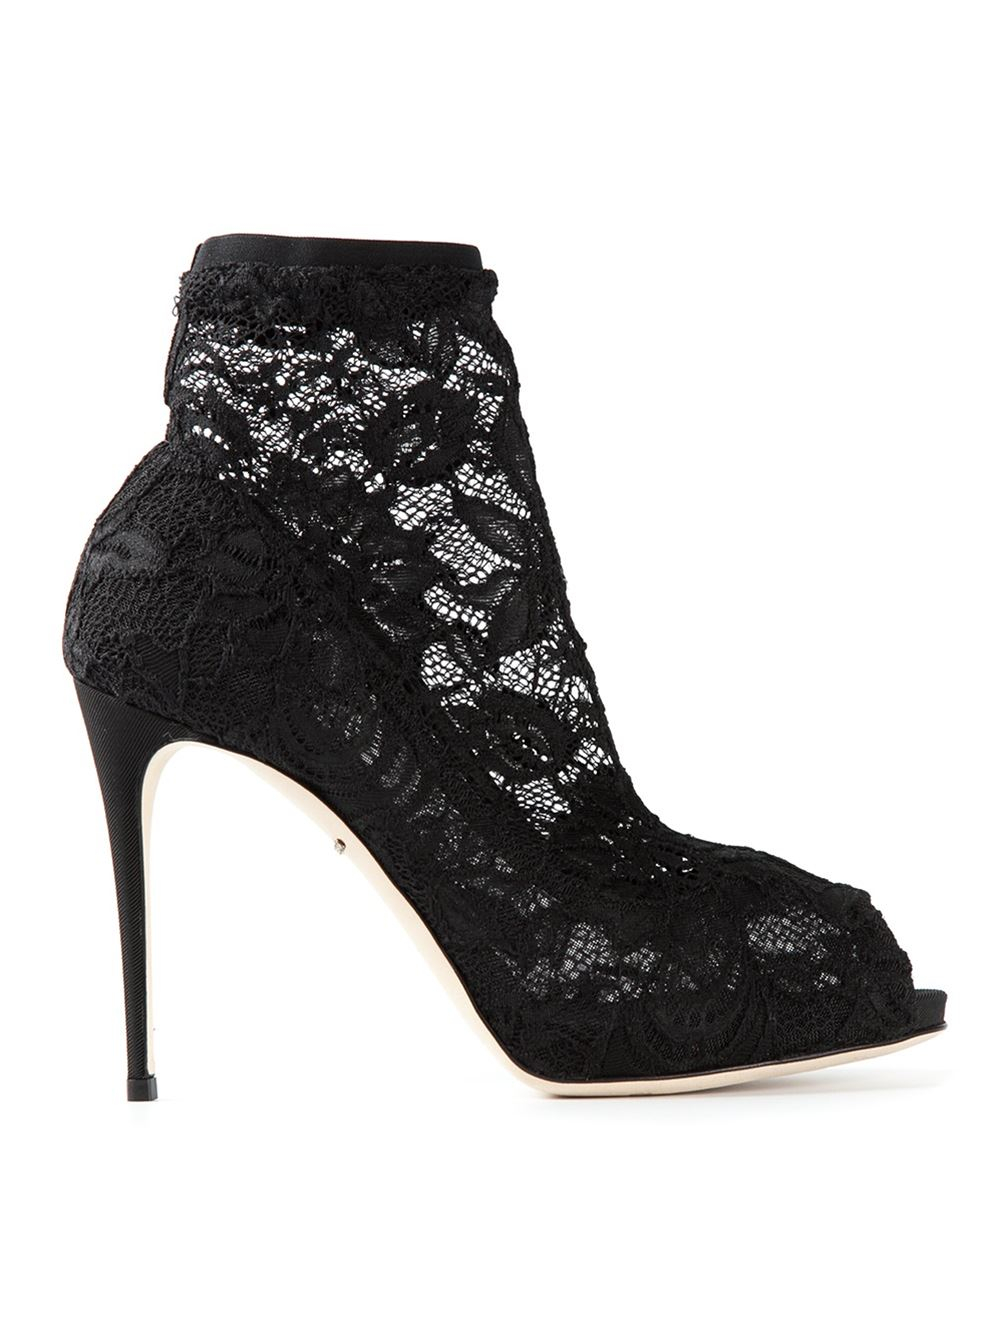 Dolce & Gabbana Lace Ankle Boots in Black | Lyst